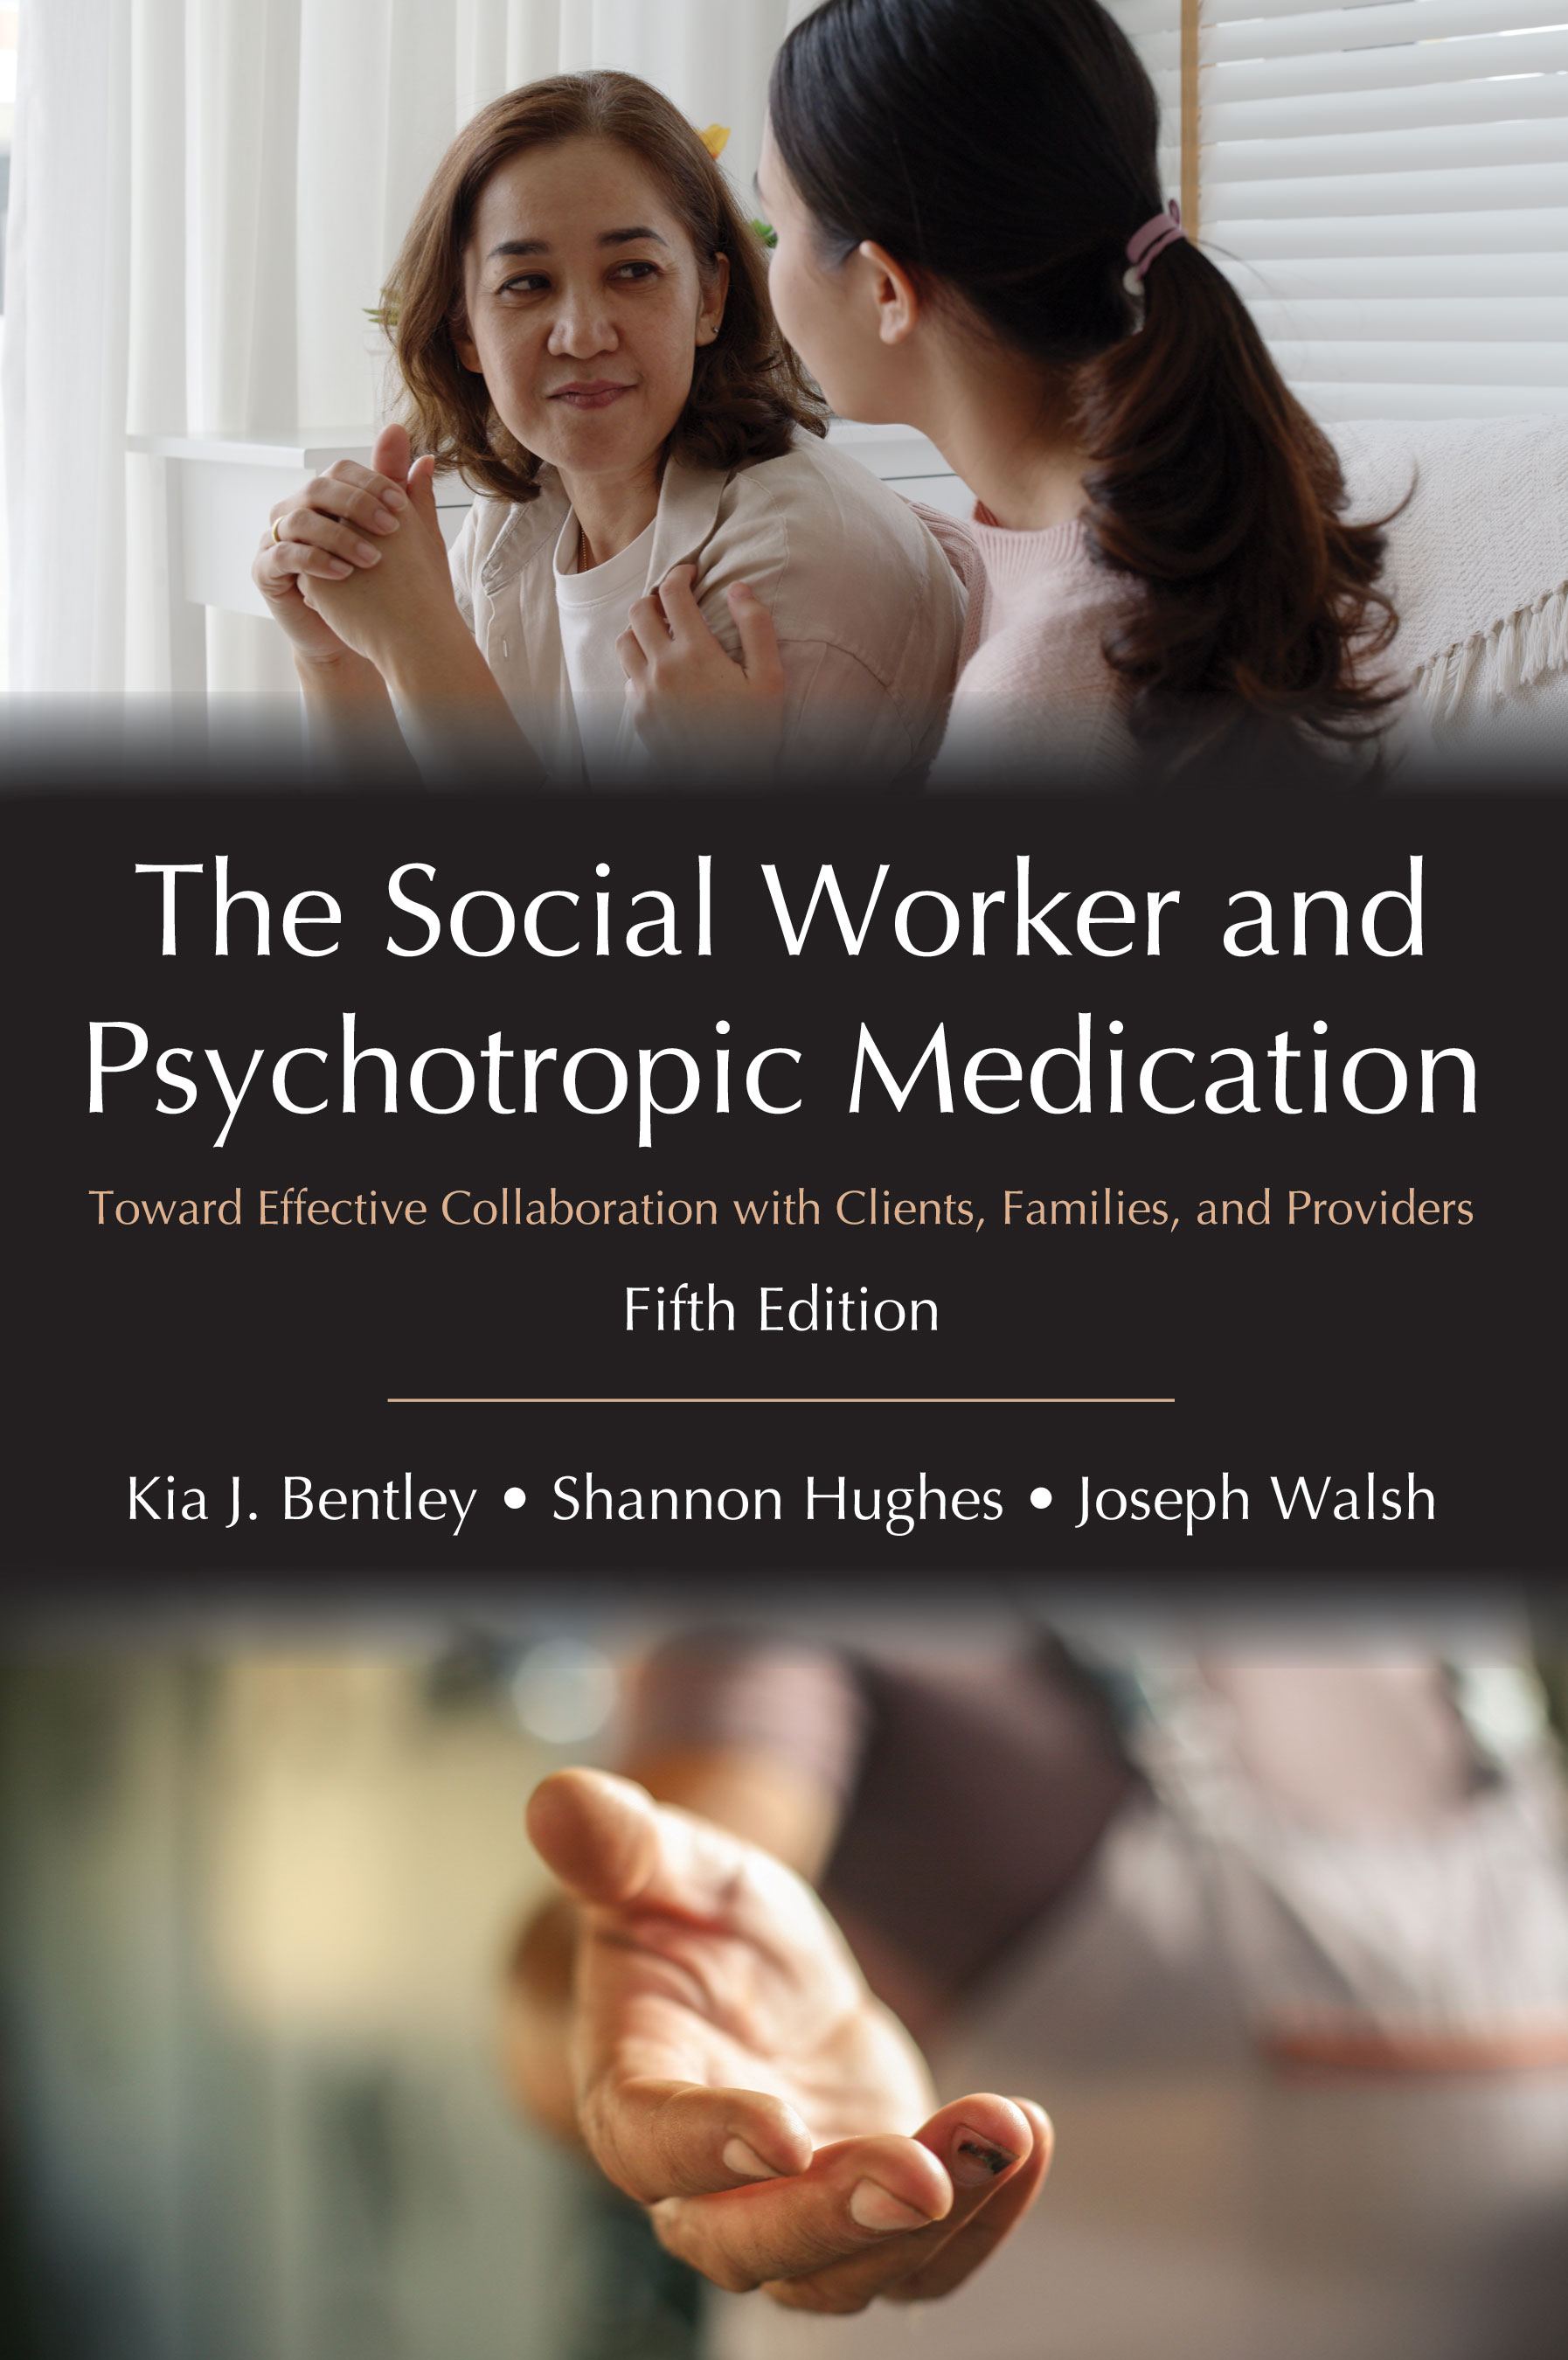 The Social Worker and Psychotropic Medication: Toward Effective Collaboration with Clients, Families, and Providers by Kia J. Bentley, Shannon  Hughes, Joseph  Walsh